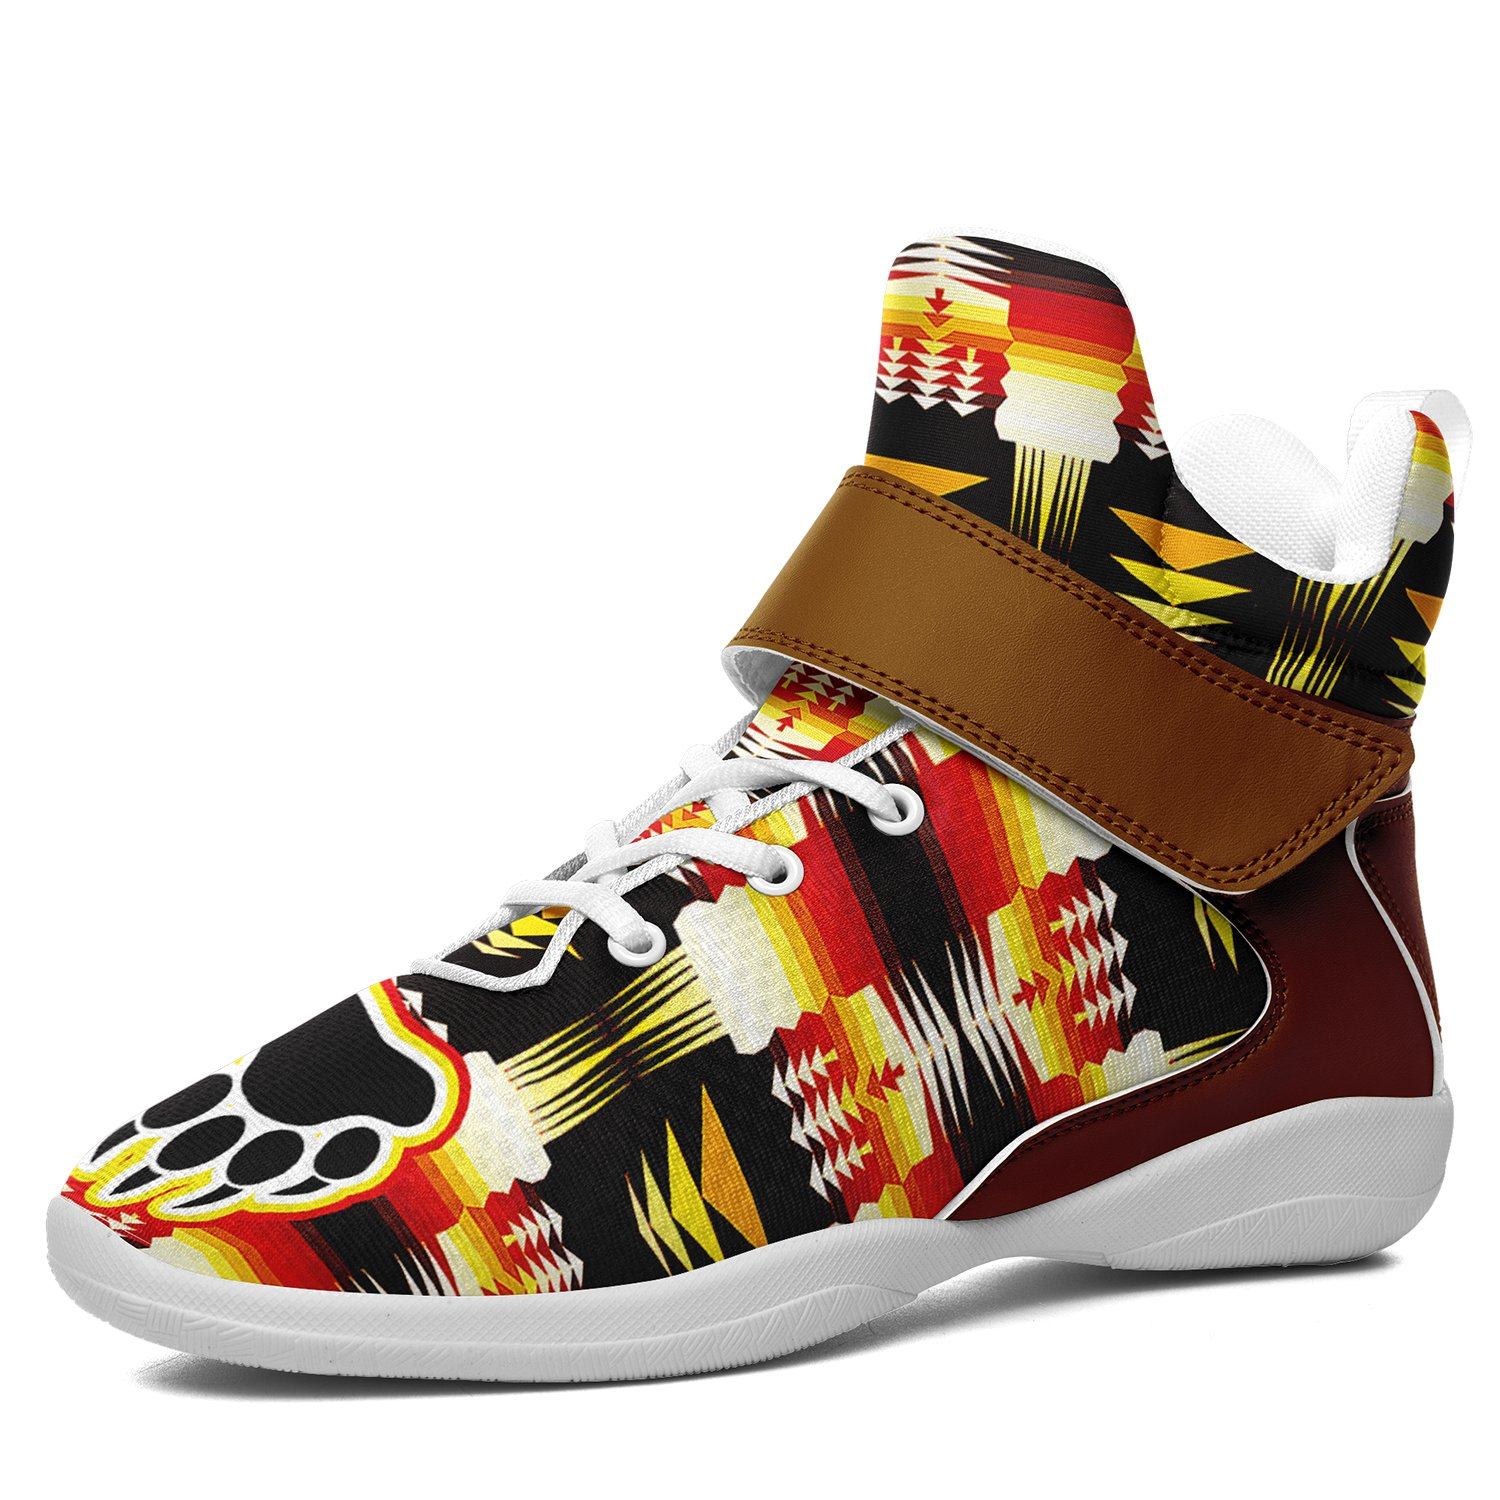 Medicine Wheel Sage Bearpaw Ipottaa Basketball / Sport High Top Shoes 49 Dzine US Women 4.5 / US Youth 3.5 / EUR 35 White Sole with Brown Strap 